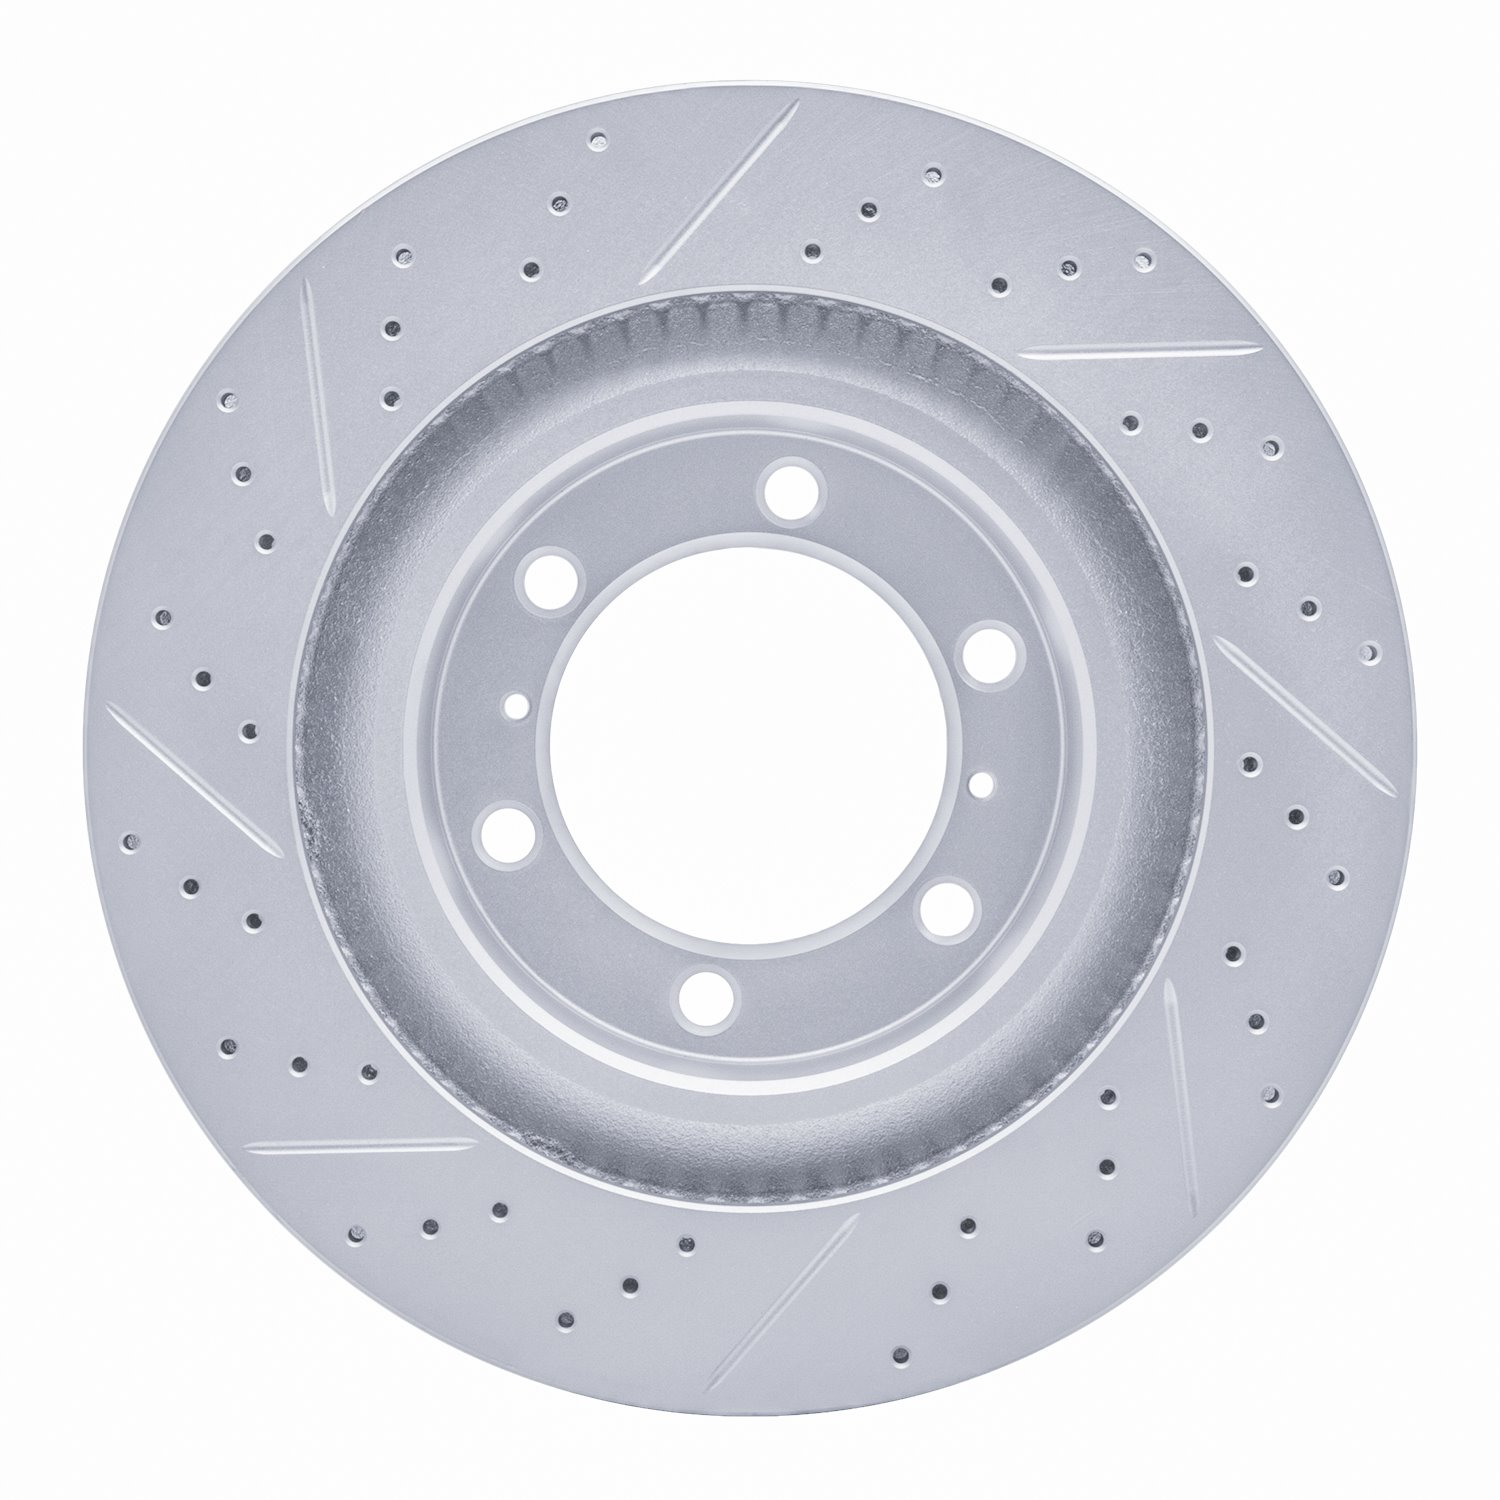 830-76142R Geoperformance Drilled/Slotted Brake Rotor, Fits Select Lexus/Toyota/Scion, Position: Front Right